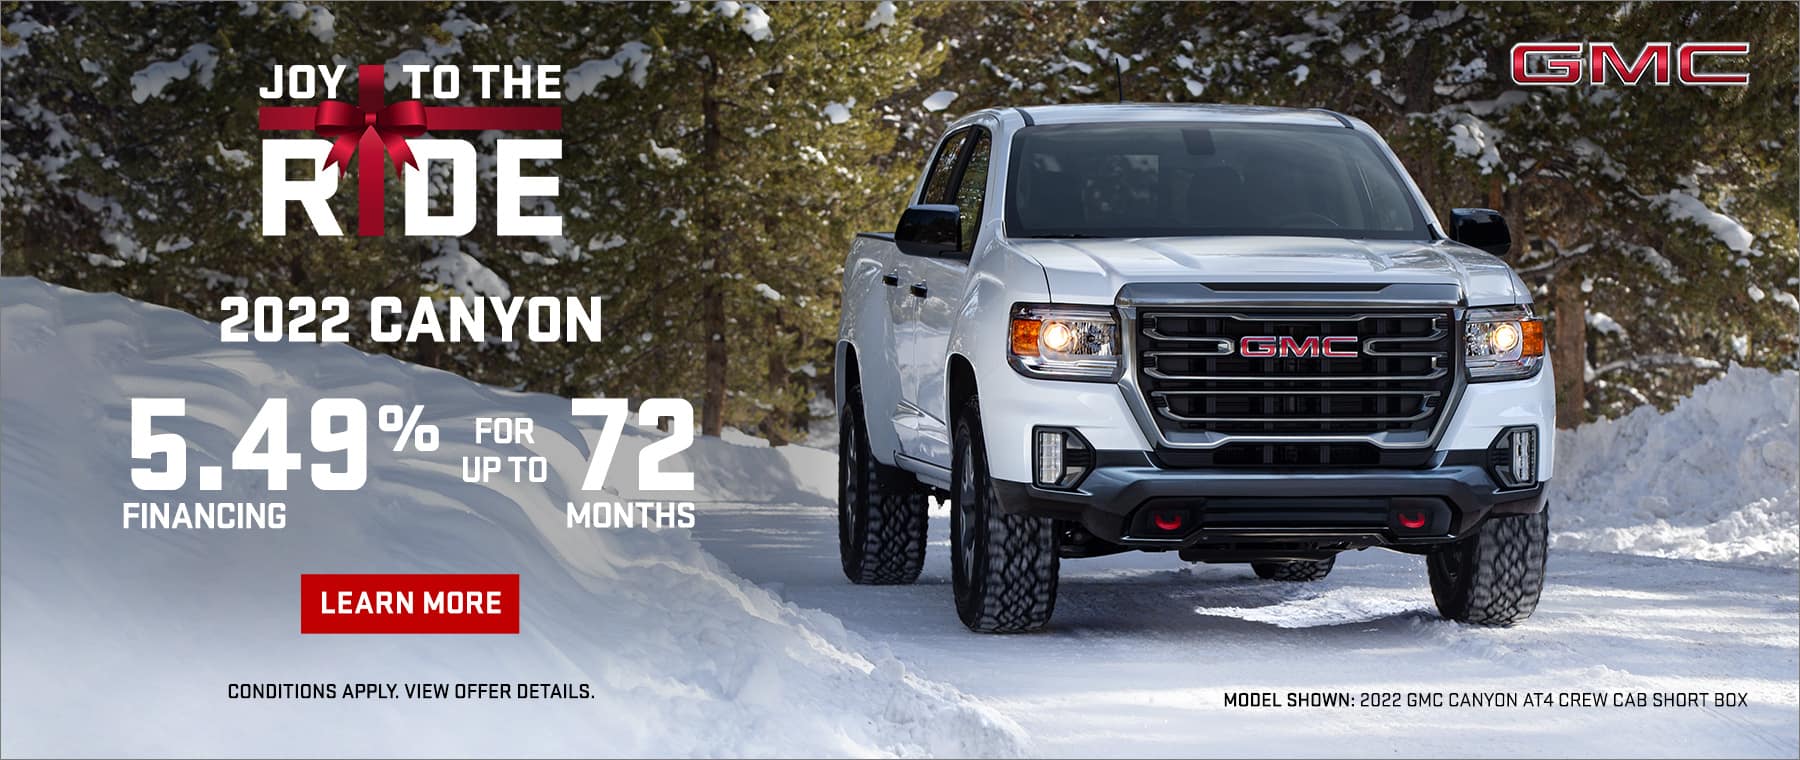 Get 5.49% financing for up to 72 months on a new 2022 GMC Canyon